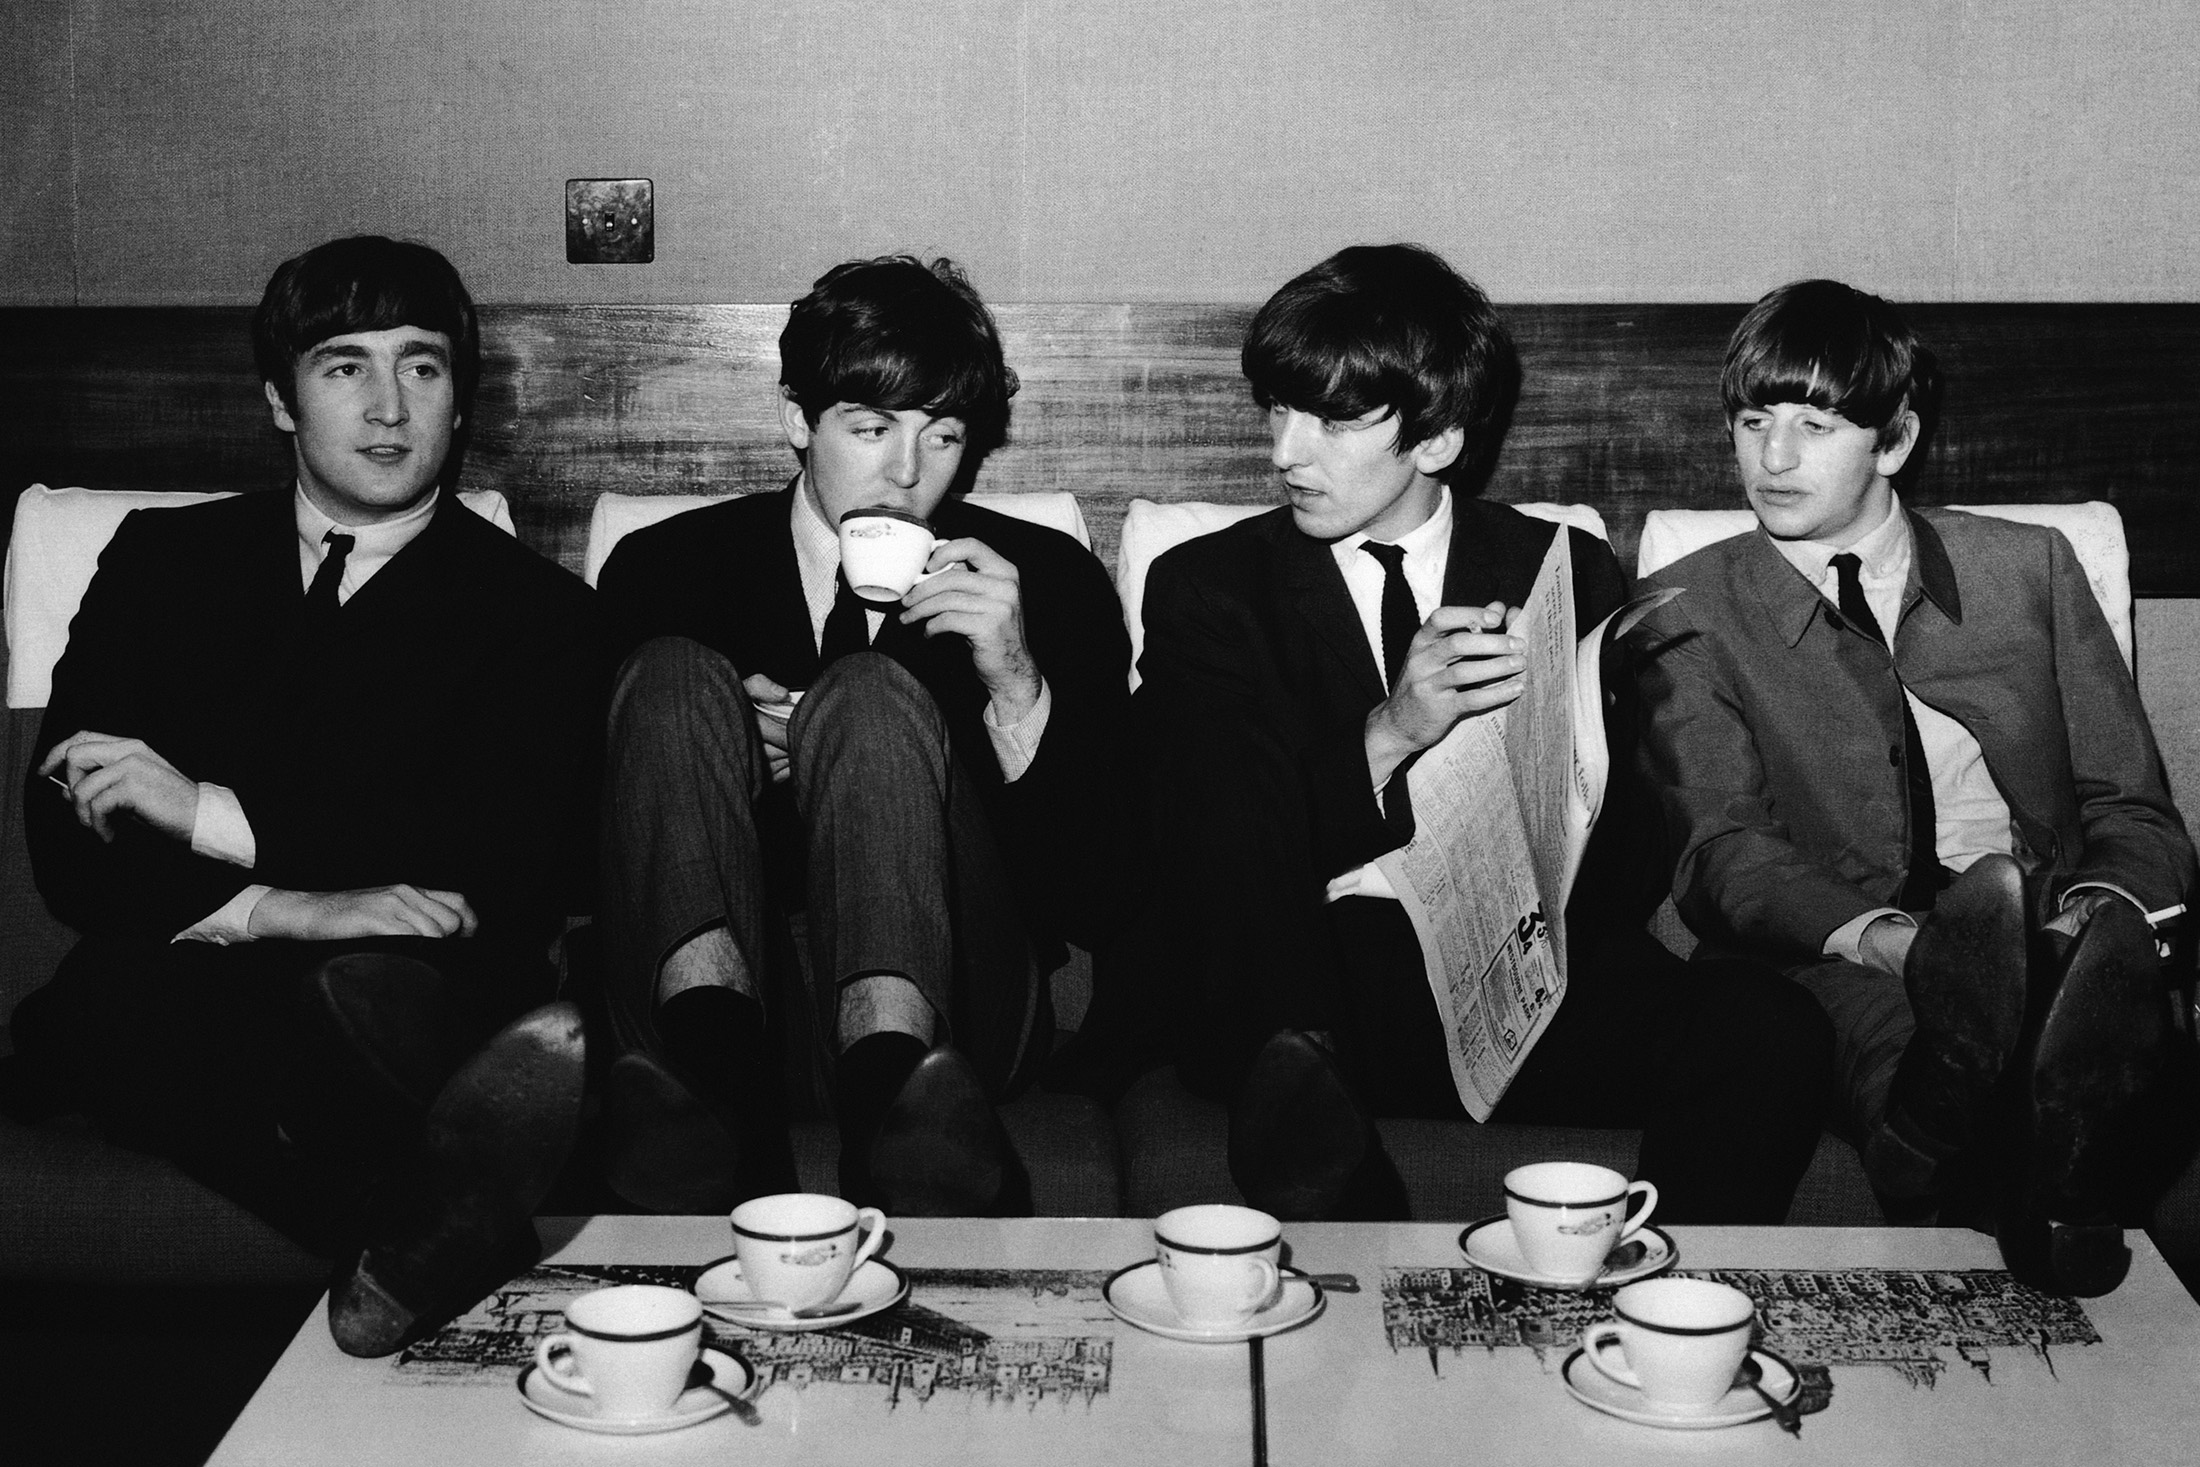 People 2200x1467 John Lennon The Beatles Ringo Starr band monochrome sitting spoon Paul McCartney plates George Harrison cup table chair newspapers suit and tie indoors men indoors bangs parted lips